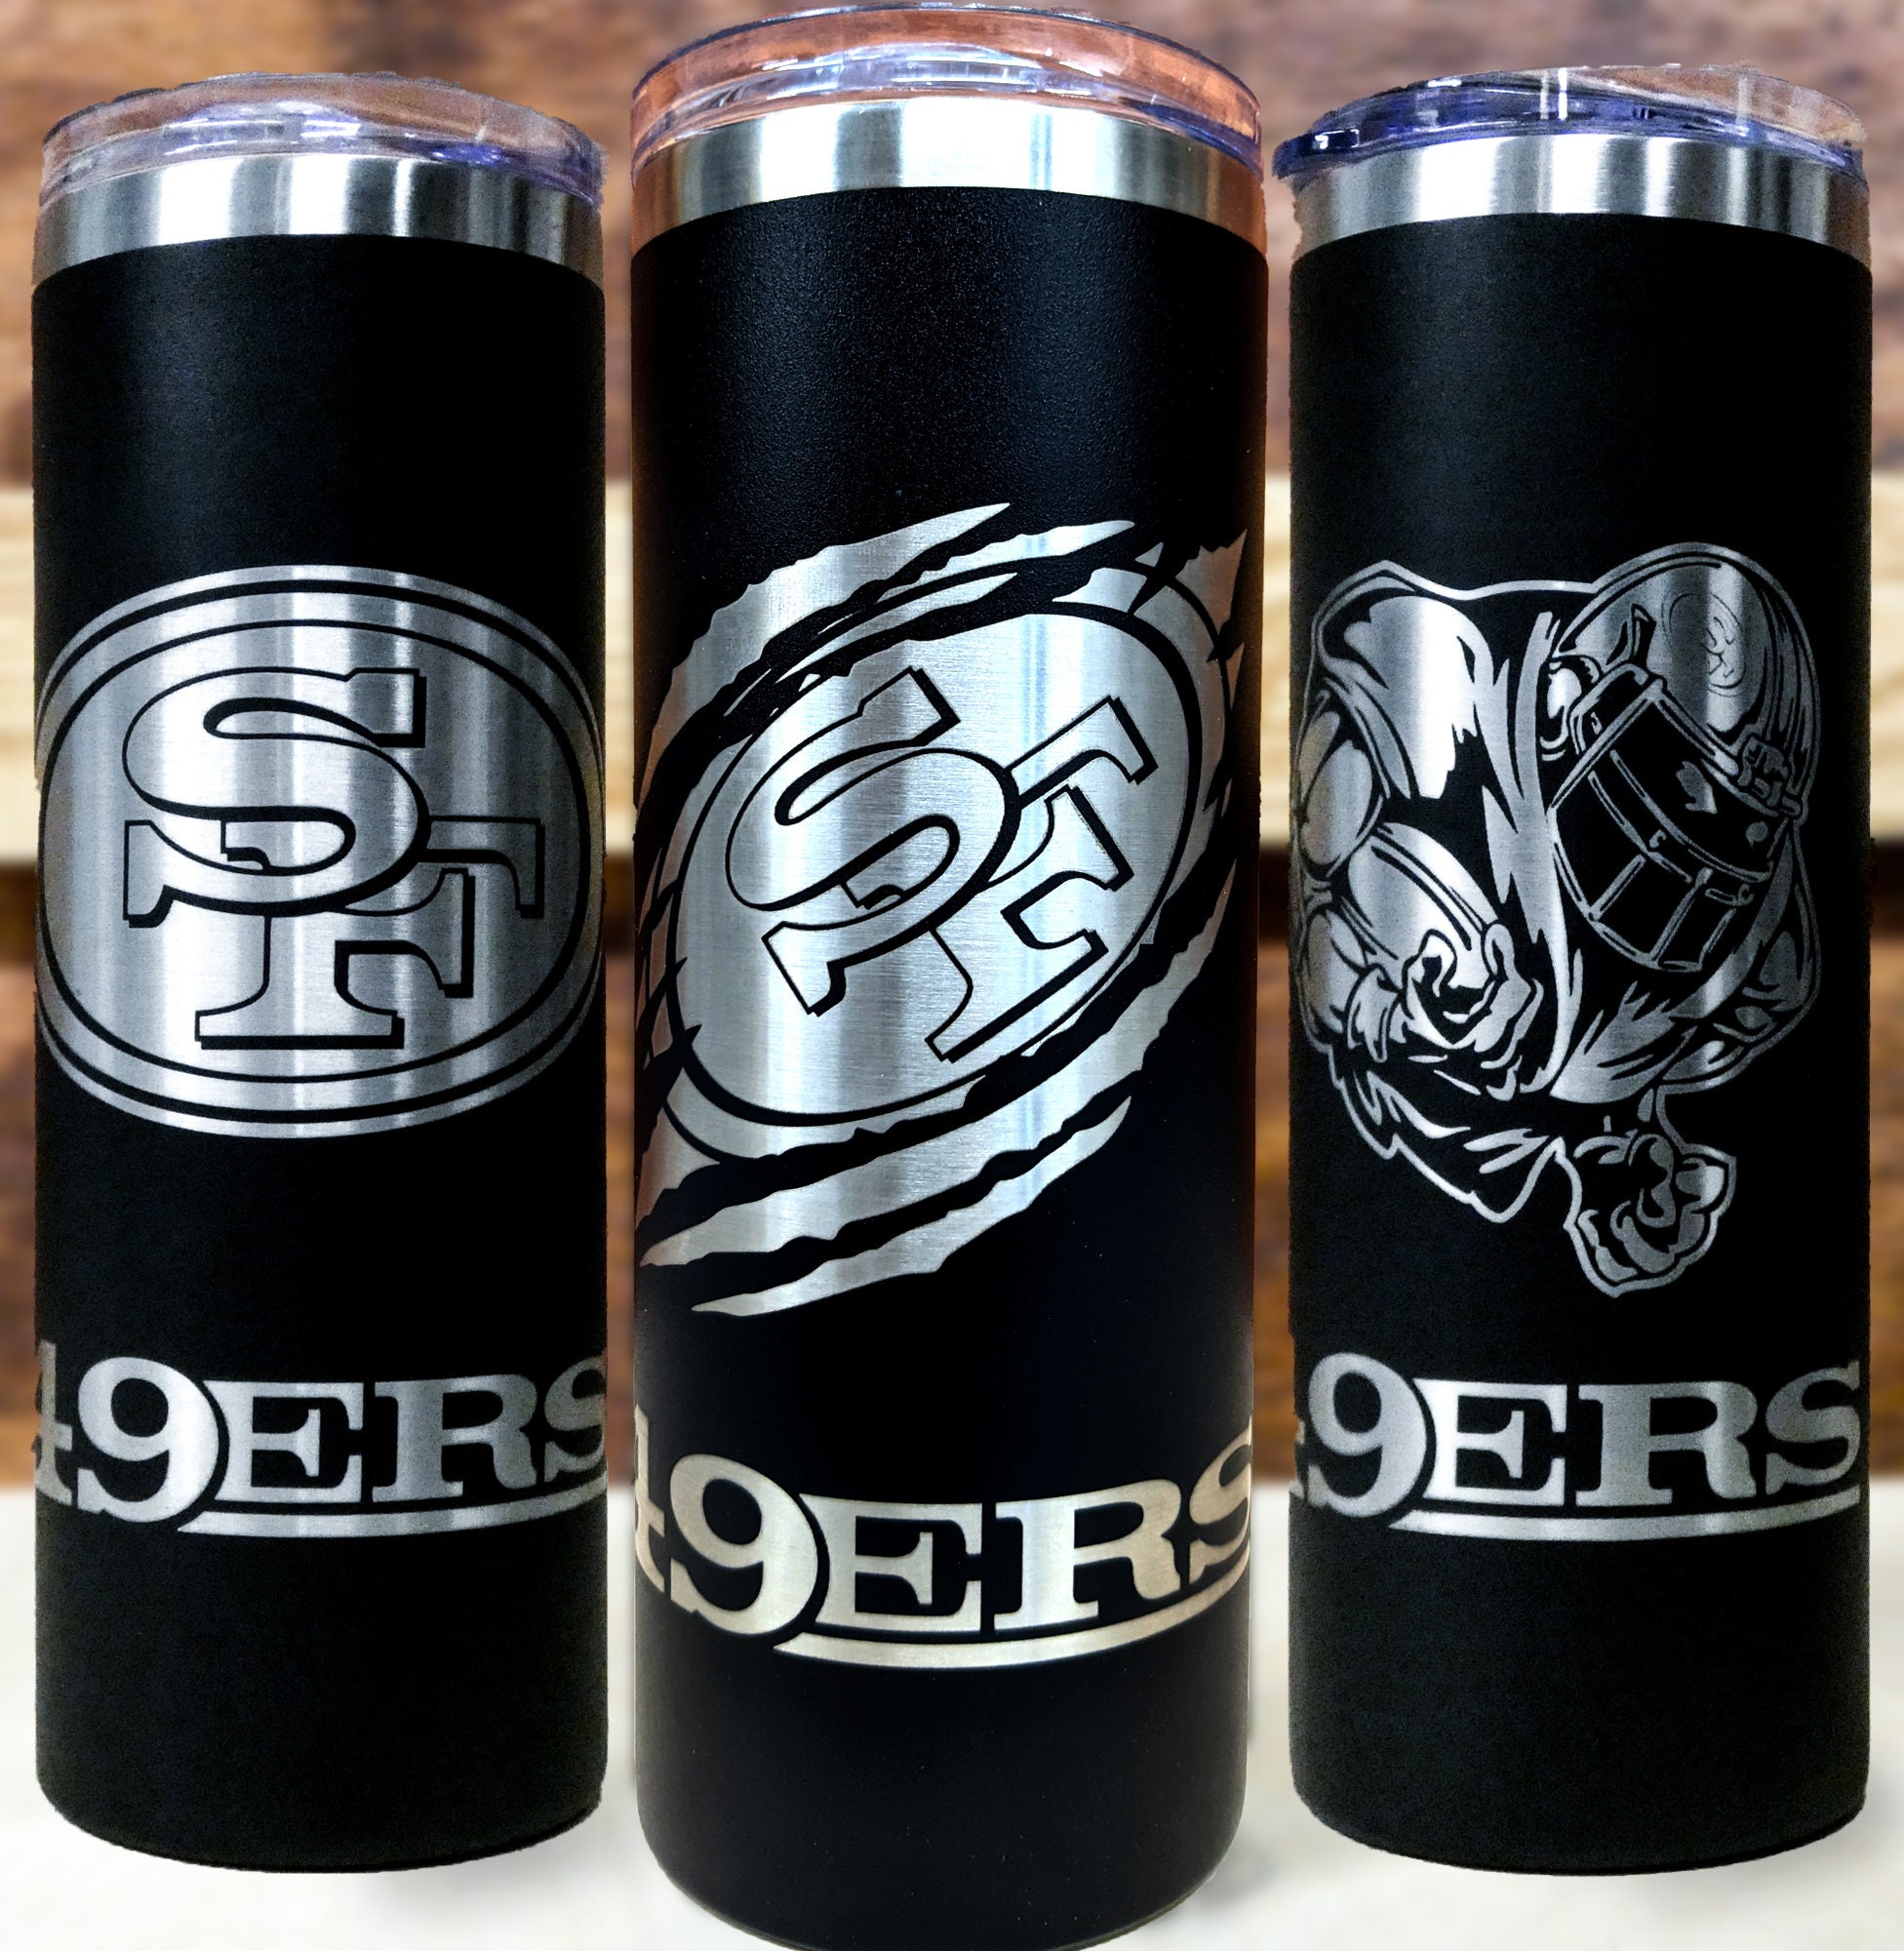 49ers Cutback Stainless Steel Water Bottle